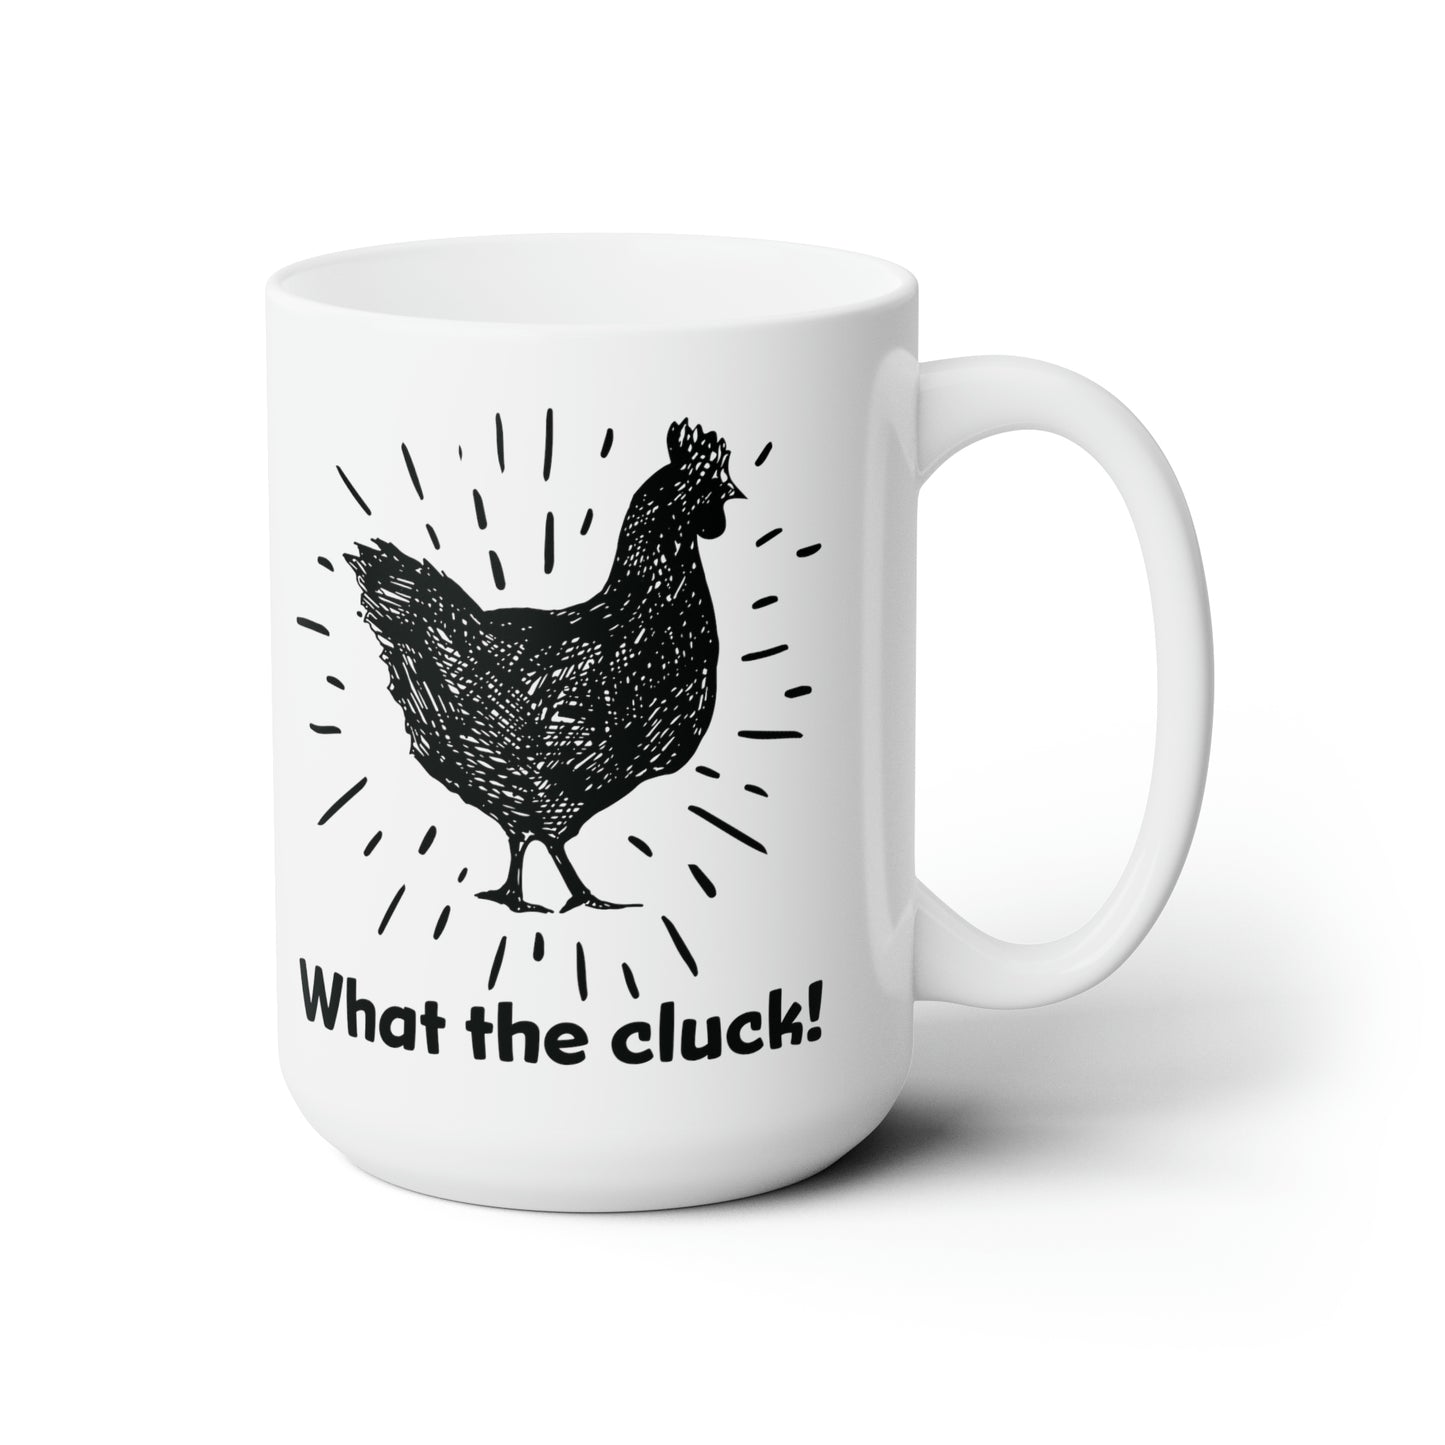 Funny Chicken Coffee Mug For What The Cluck Quote Hot Tea Cup